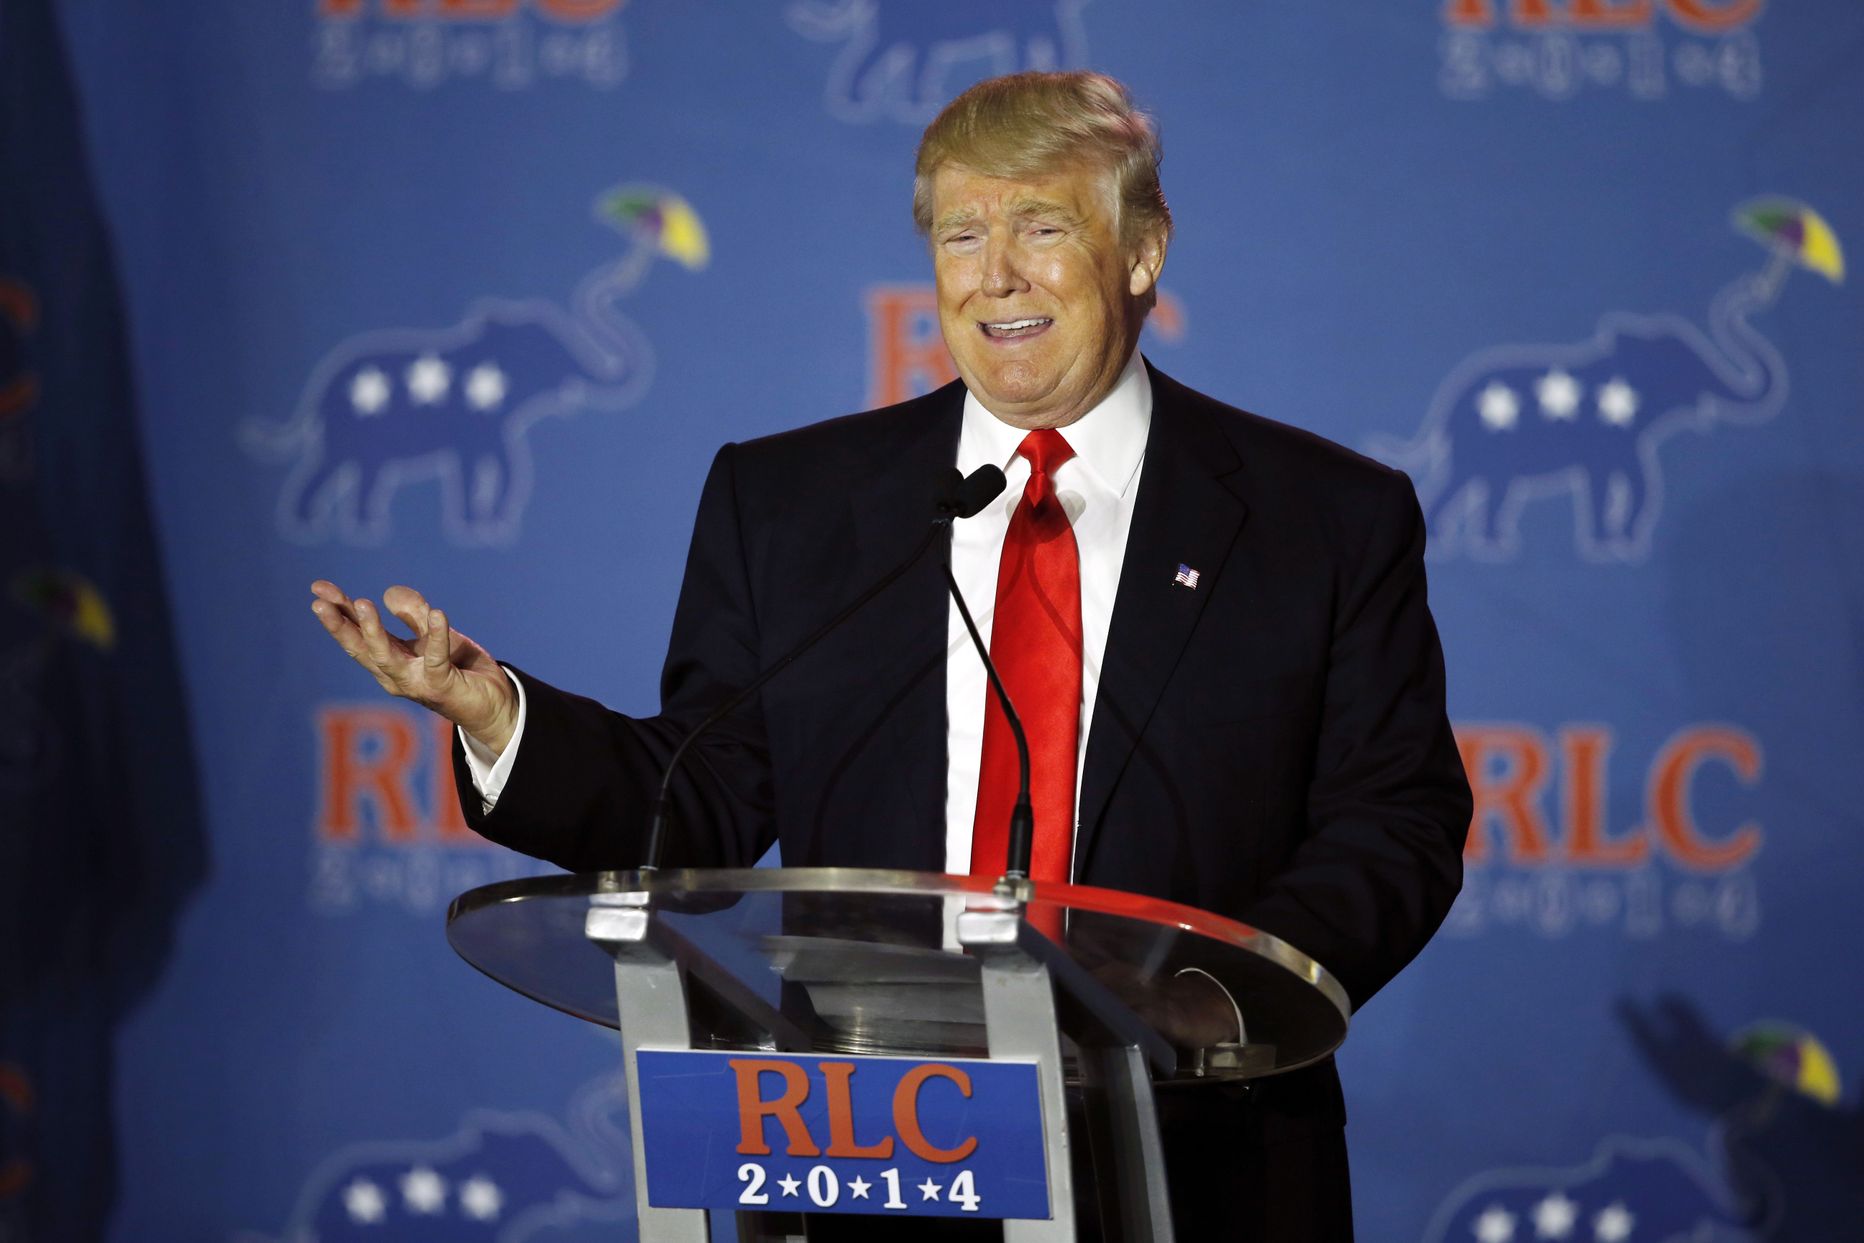 Donald Trump addresses the Republican Leadership Conference in New Orleans, La., Friday, May 30, 2014. Midterm election campaigns are in full swing, but several thousand Republicans gathering in Louisiana look toward a bigger prize. (AP Photo/Bill Haber) / TT / kod 436